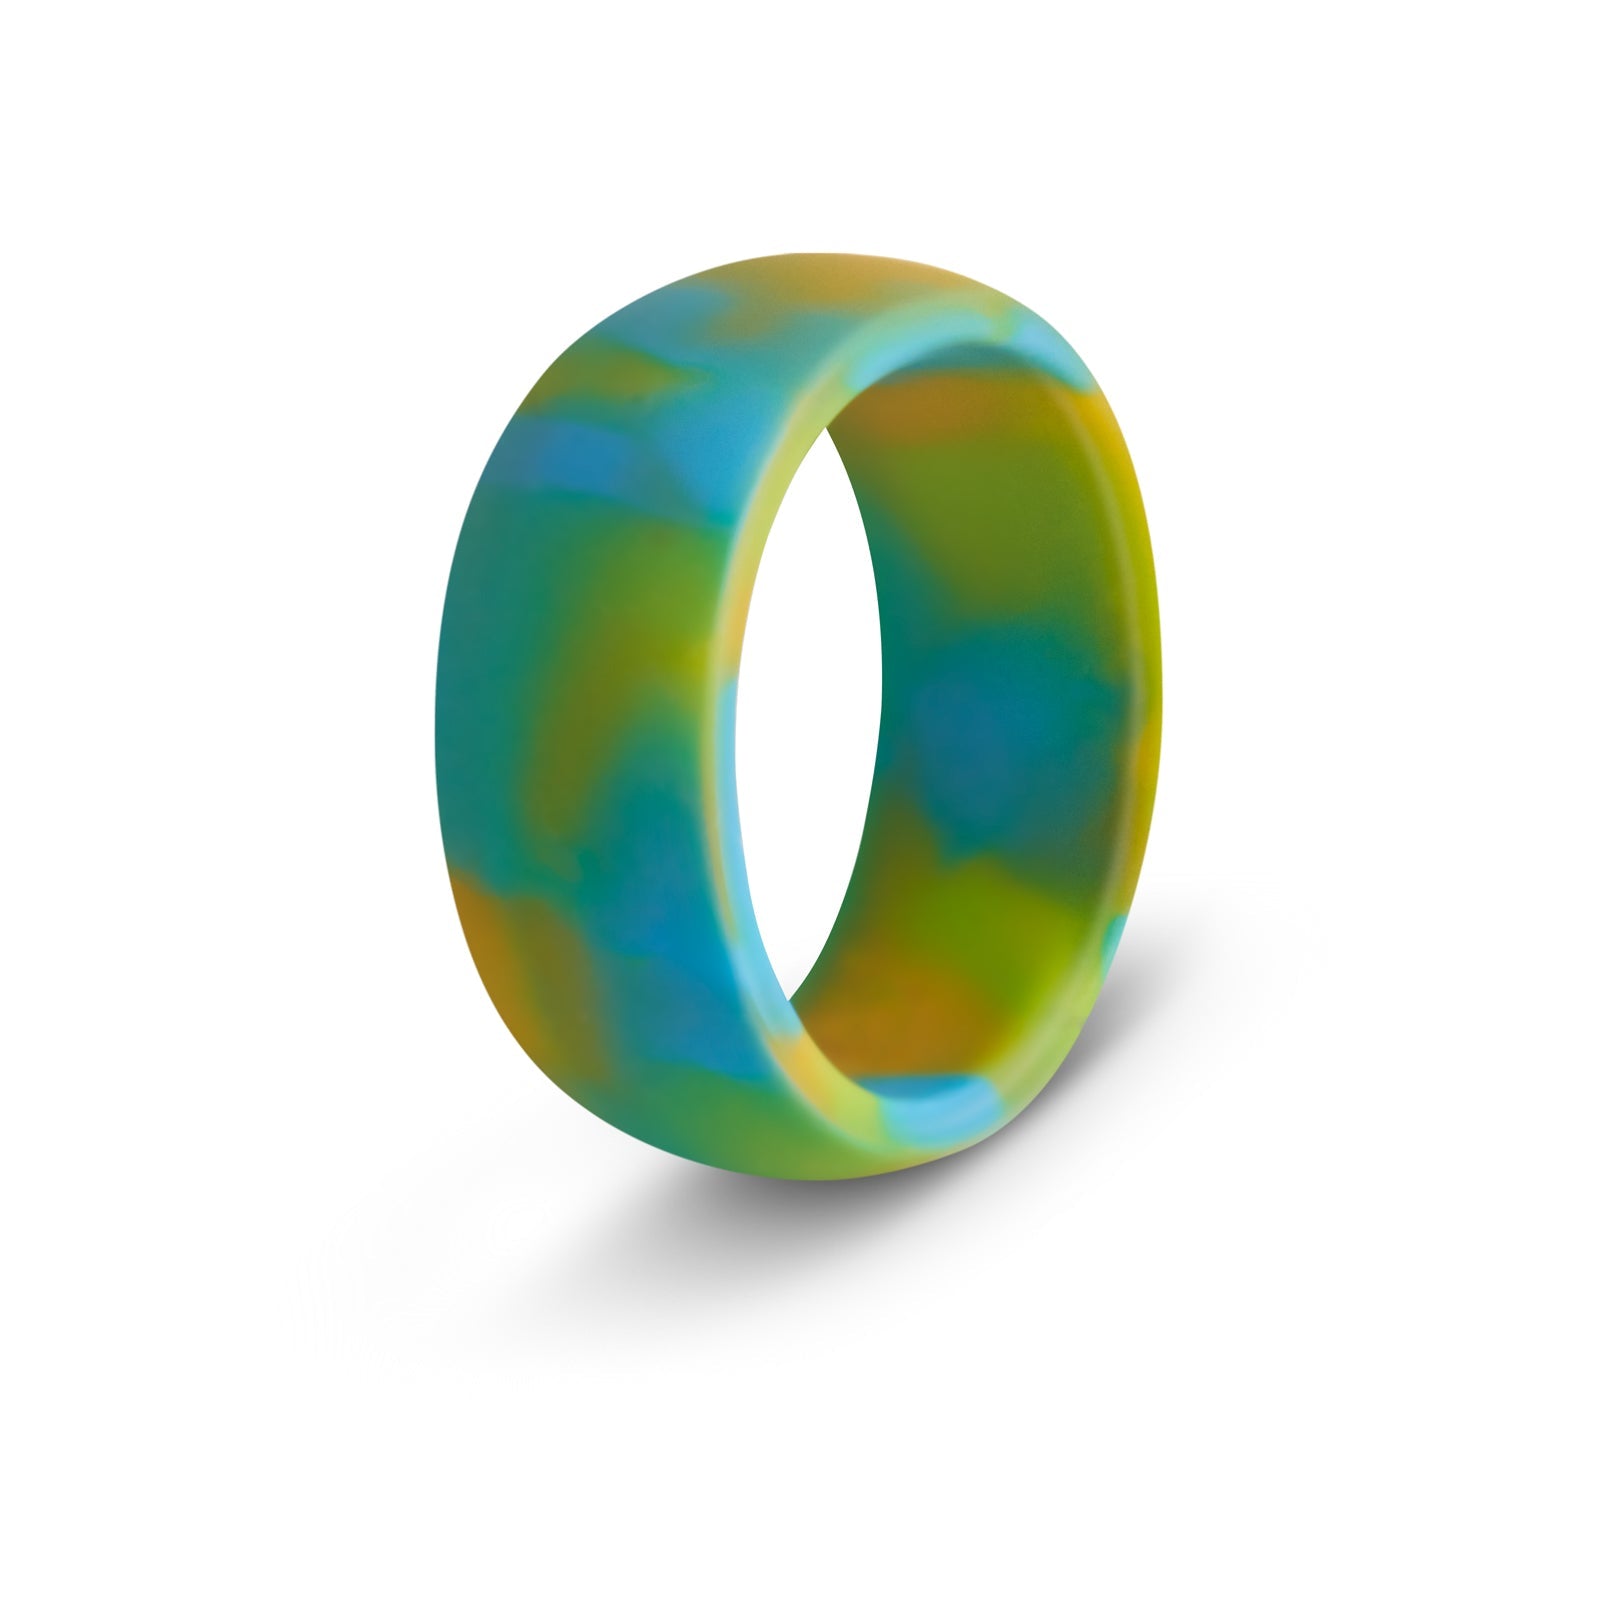 botthms botthms Ocean Flow Silicone Ring Yellow & Turquoise Silicone Rings